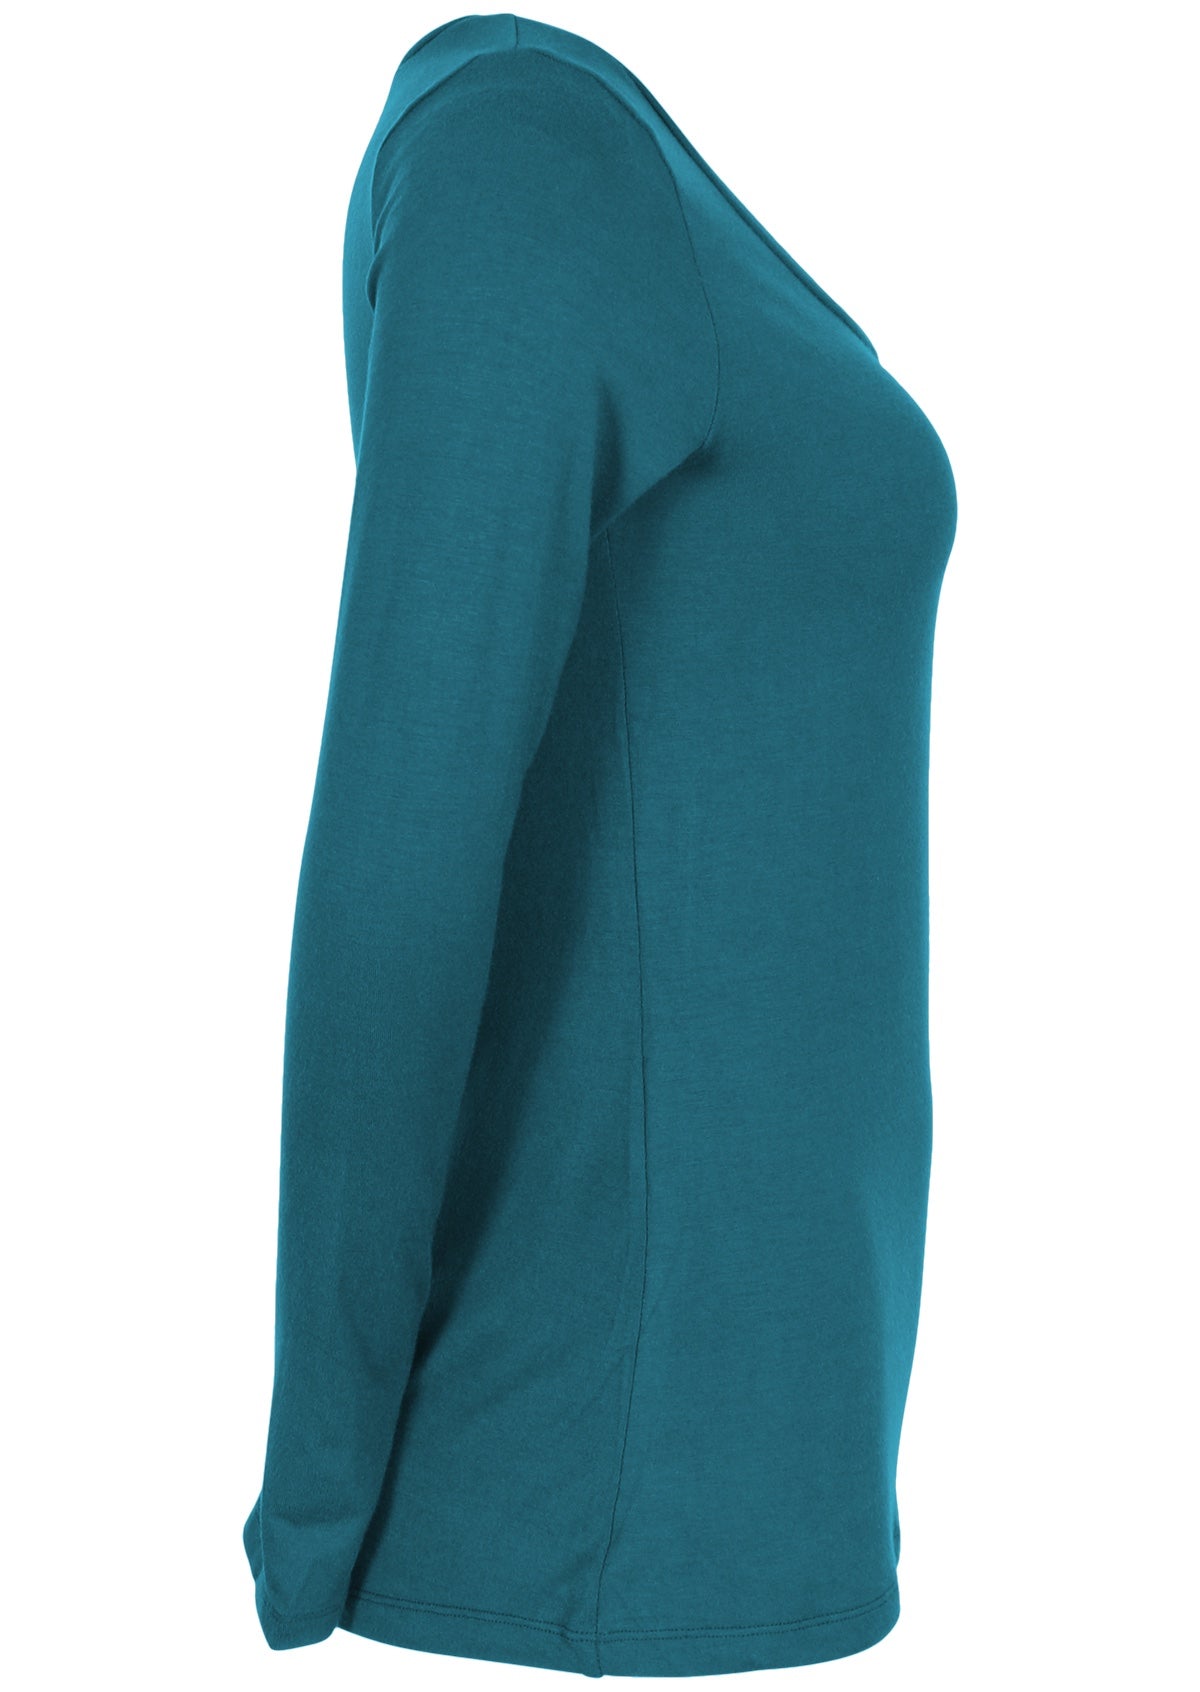 Side view of women's teal long sleeve stretch v-neck soft rayon top.